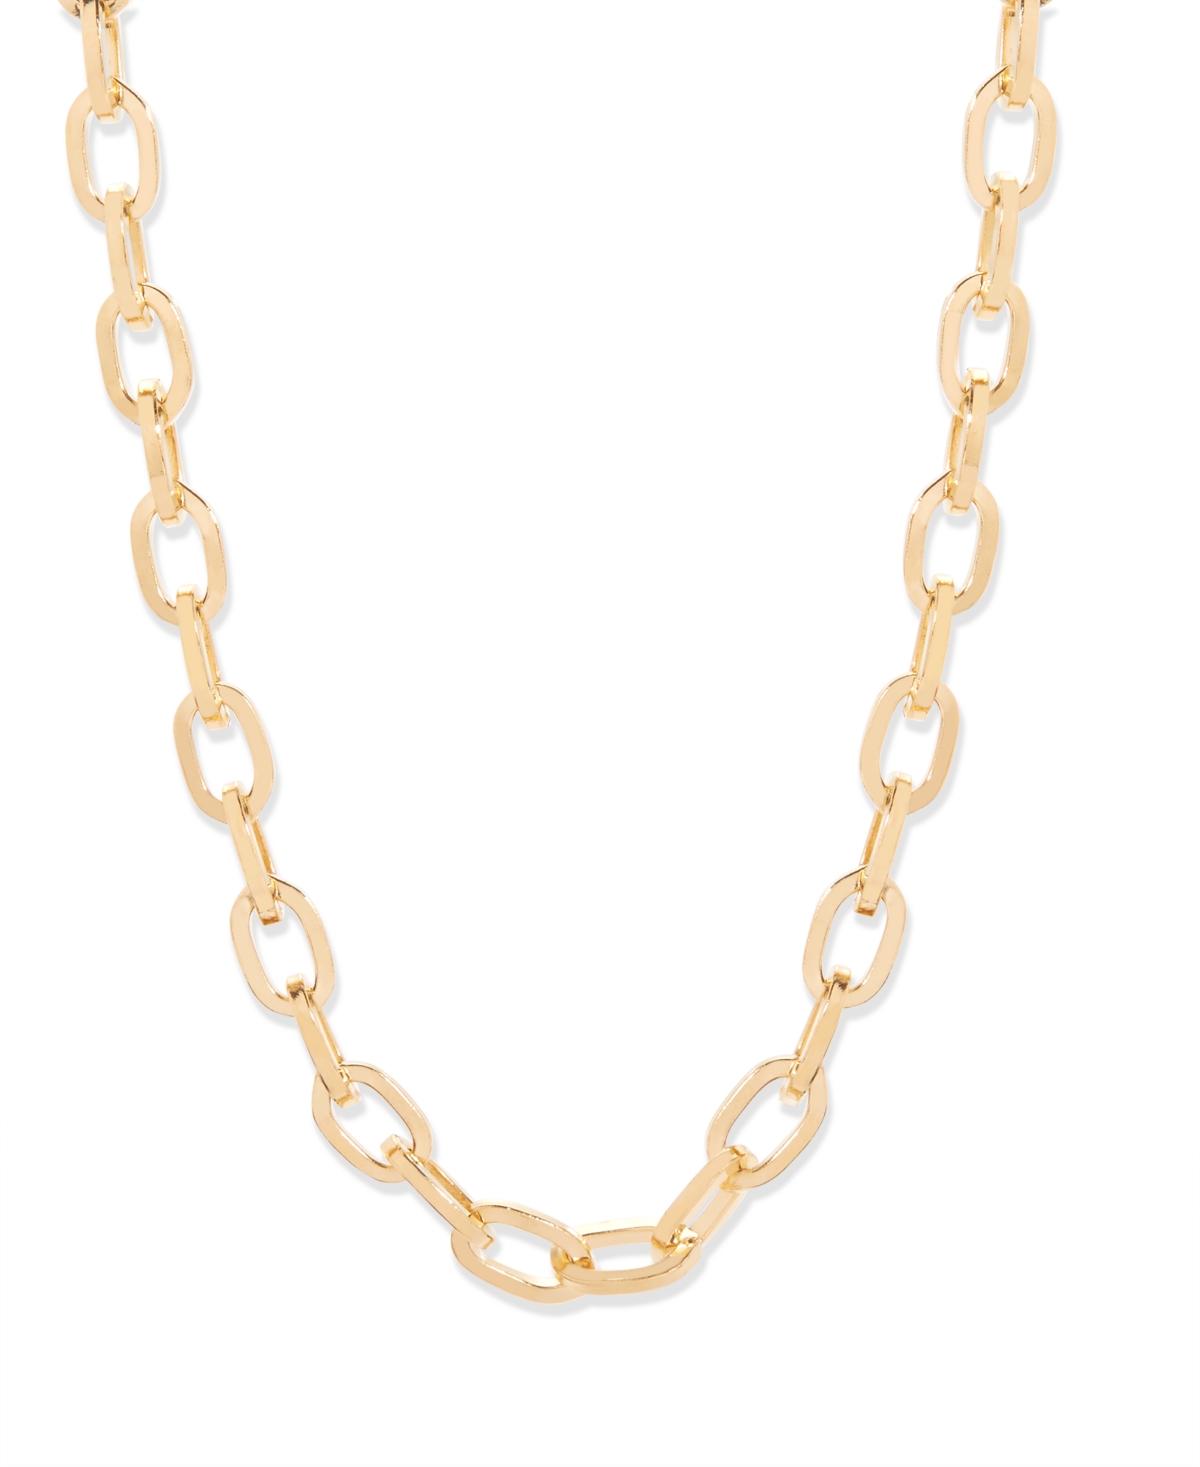 Brook & York 14k Gold-plated Esme Chain Necklace